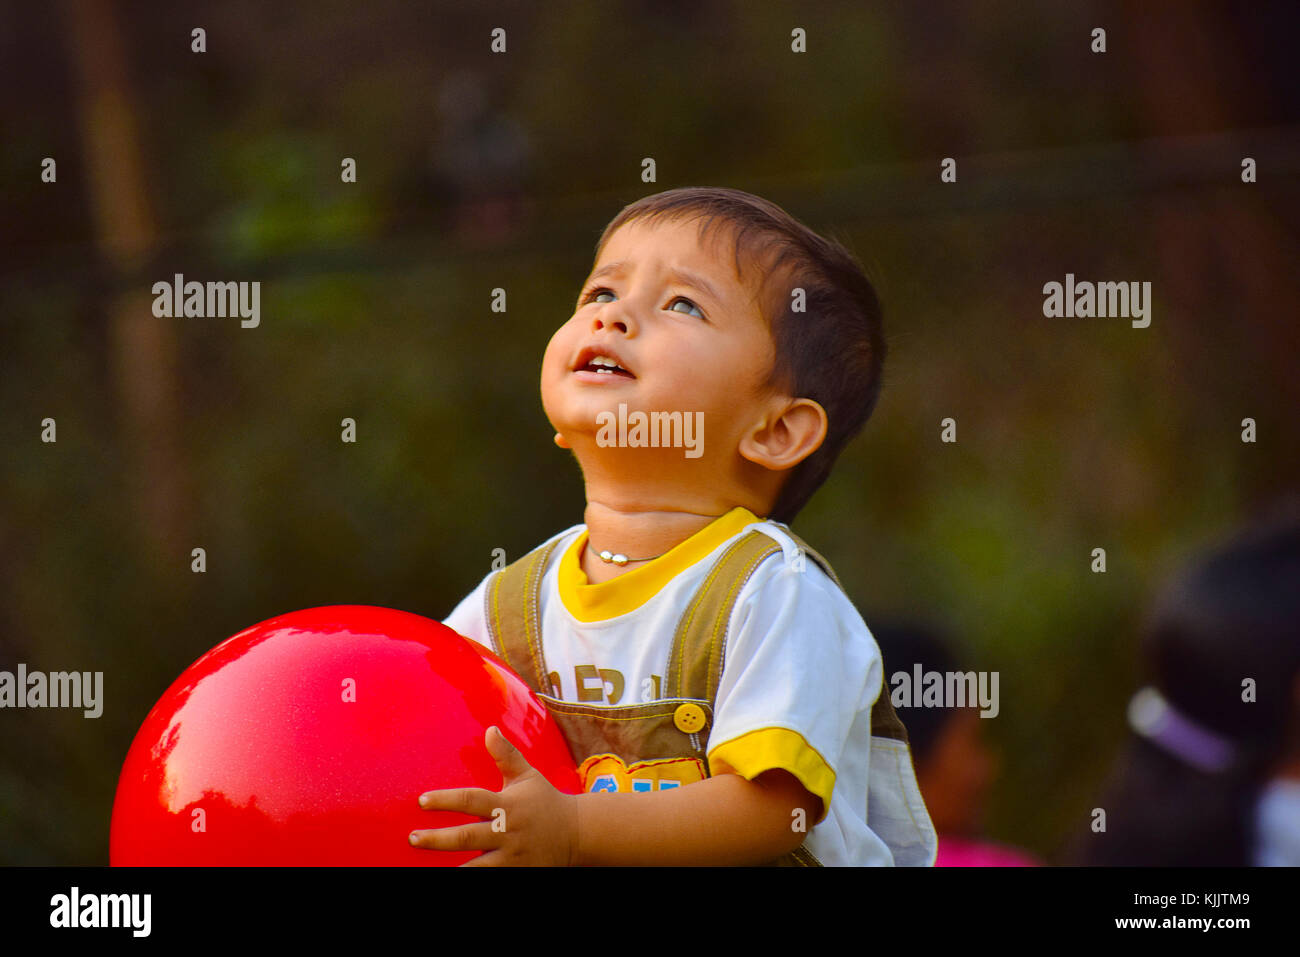 Cute Baby playing with red ball in the garden, Pune, Maharashtra. Stock Photo